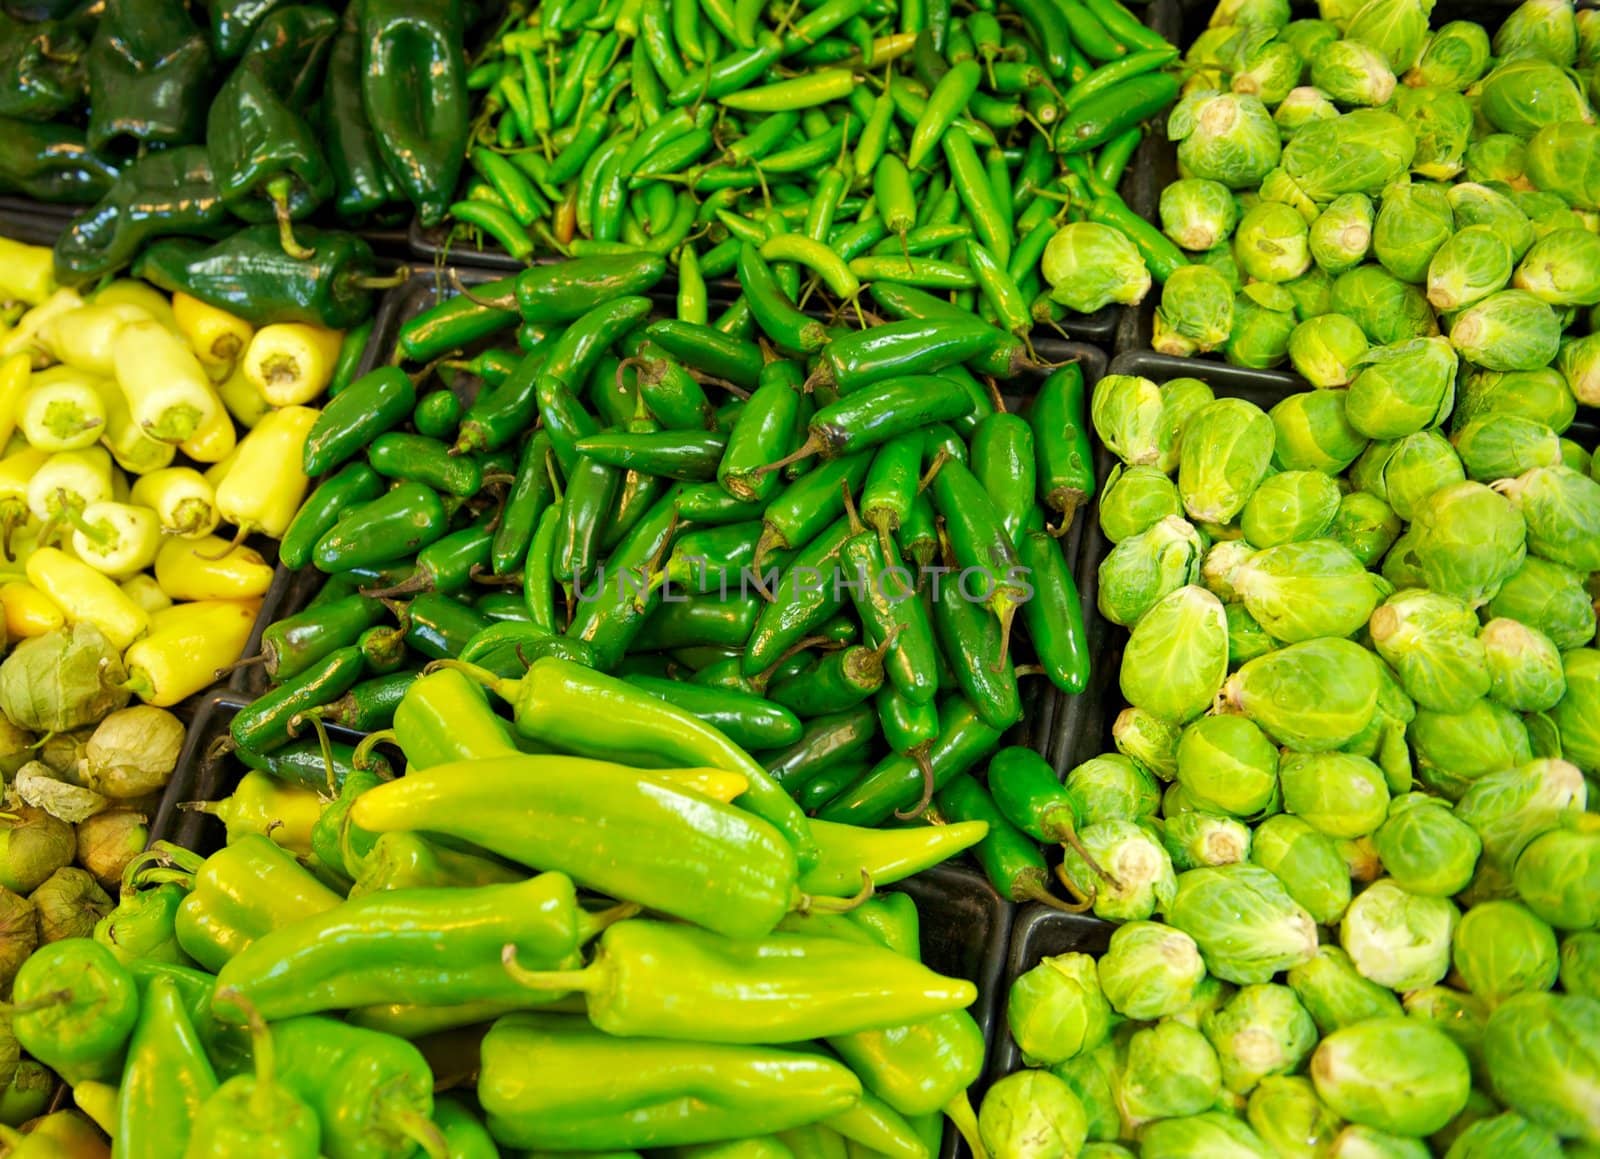 Grocery Store Bins Filled With Chilies by pixelsnap